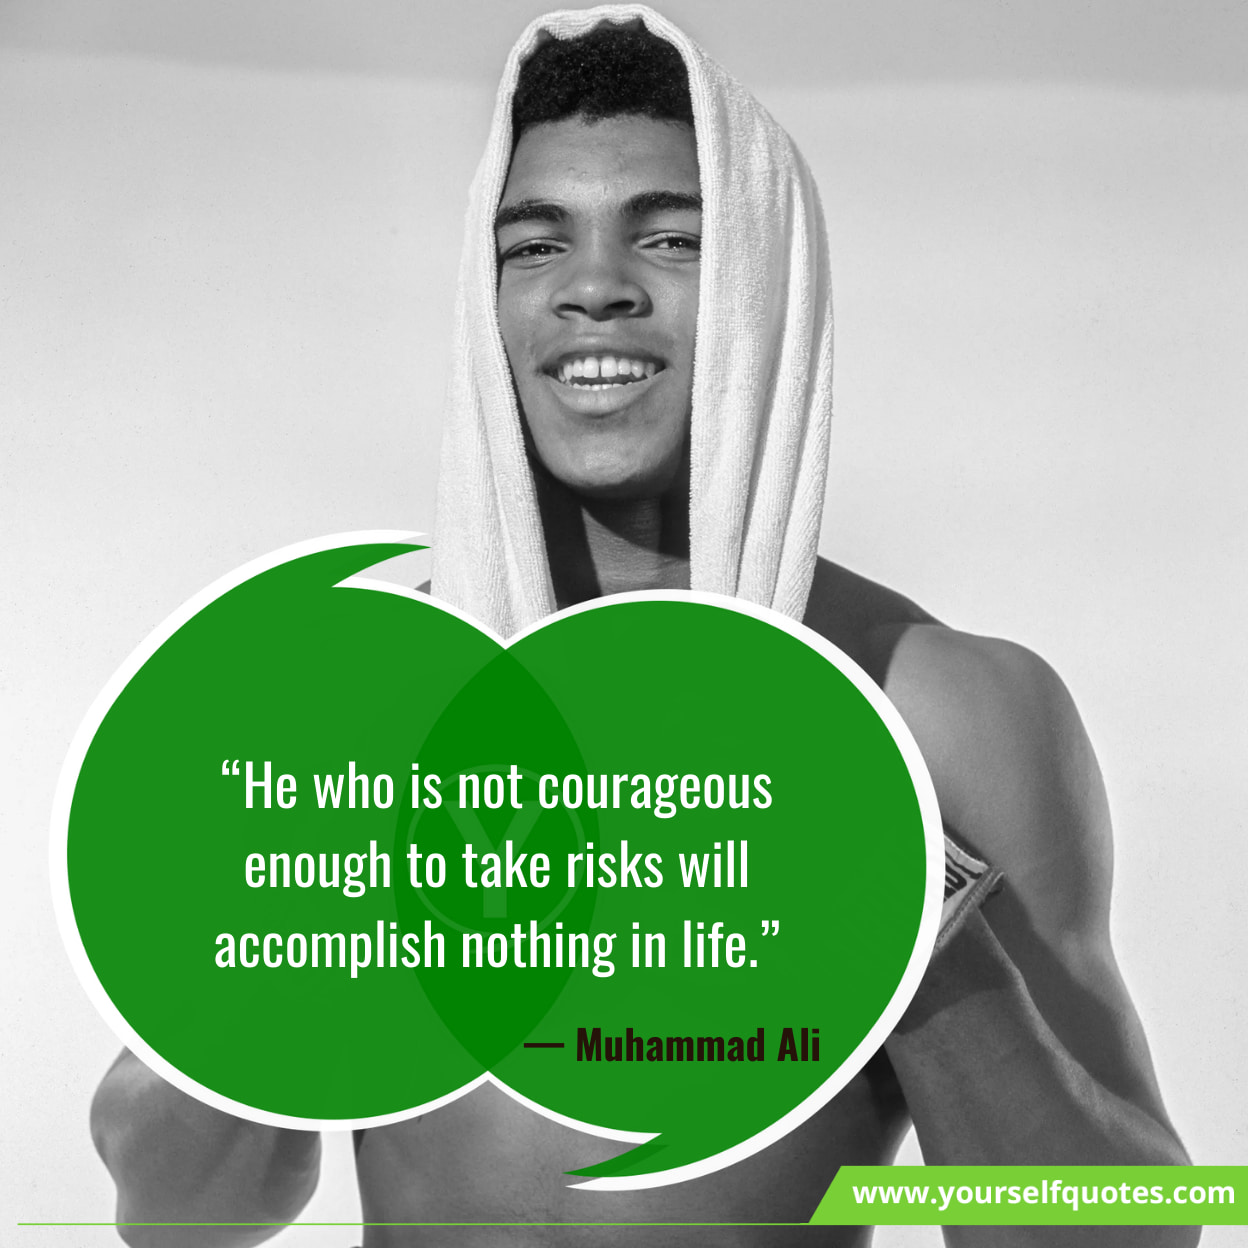 Muhammad Ali Quotes About Life